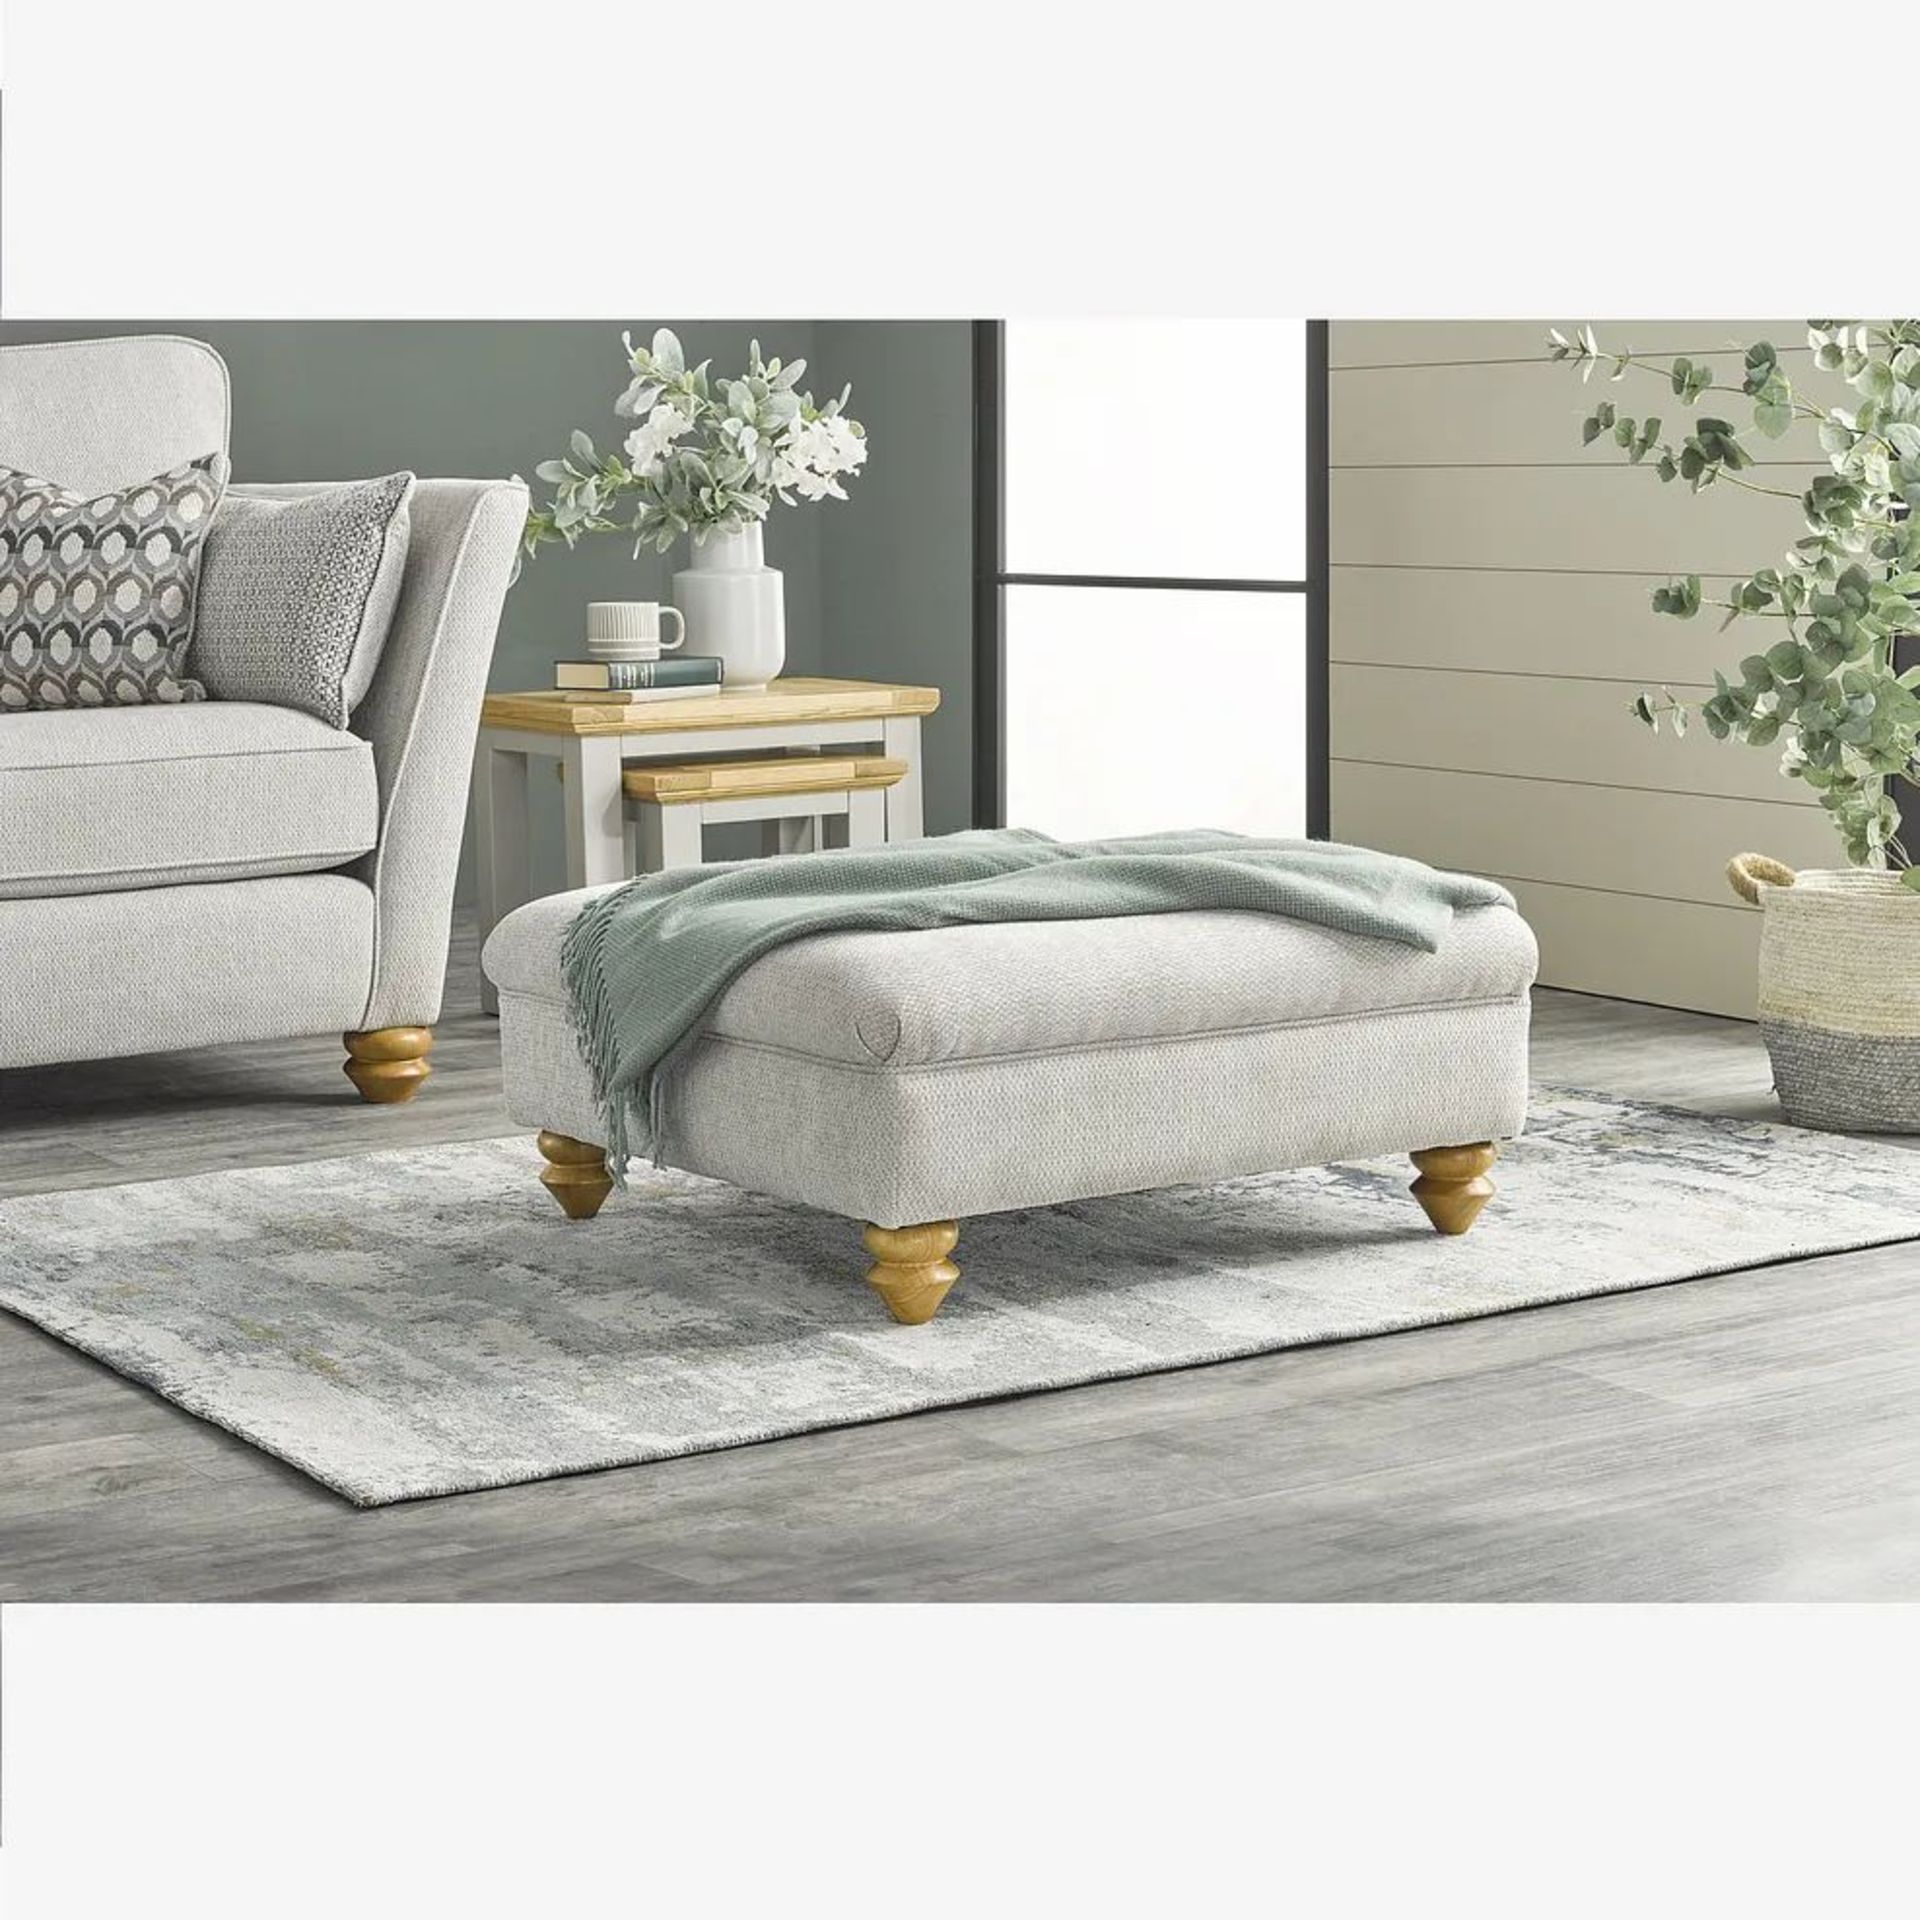 BRAND NEW GAINSBROUGH Footstool - MINERVA SILVER. RRP £369. Elegant and inviting, our Gainsborough - Image 6 of 6